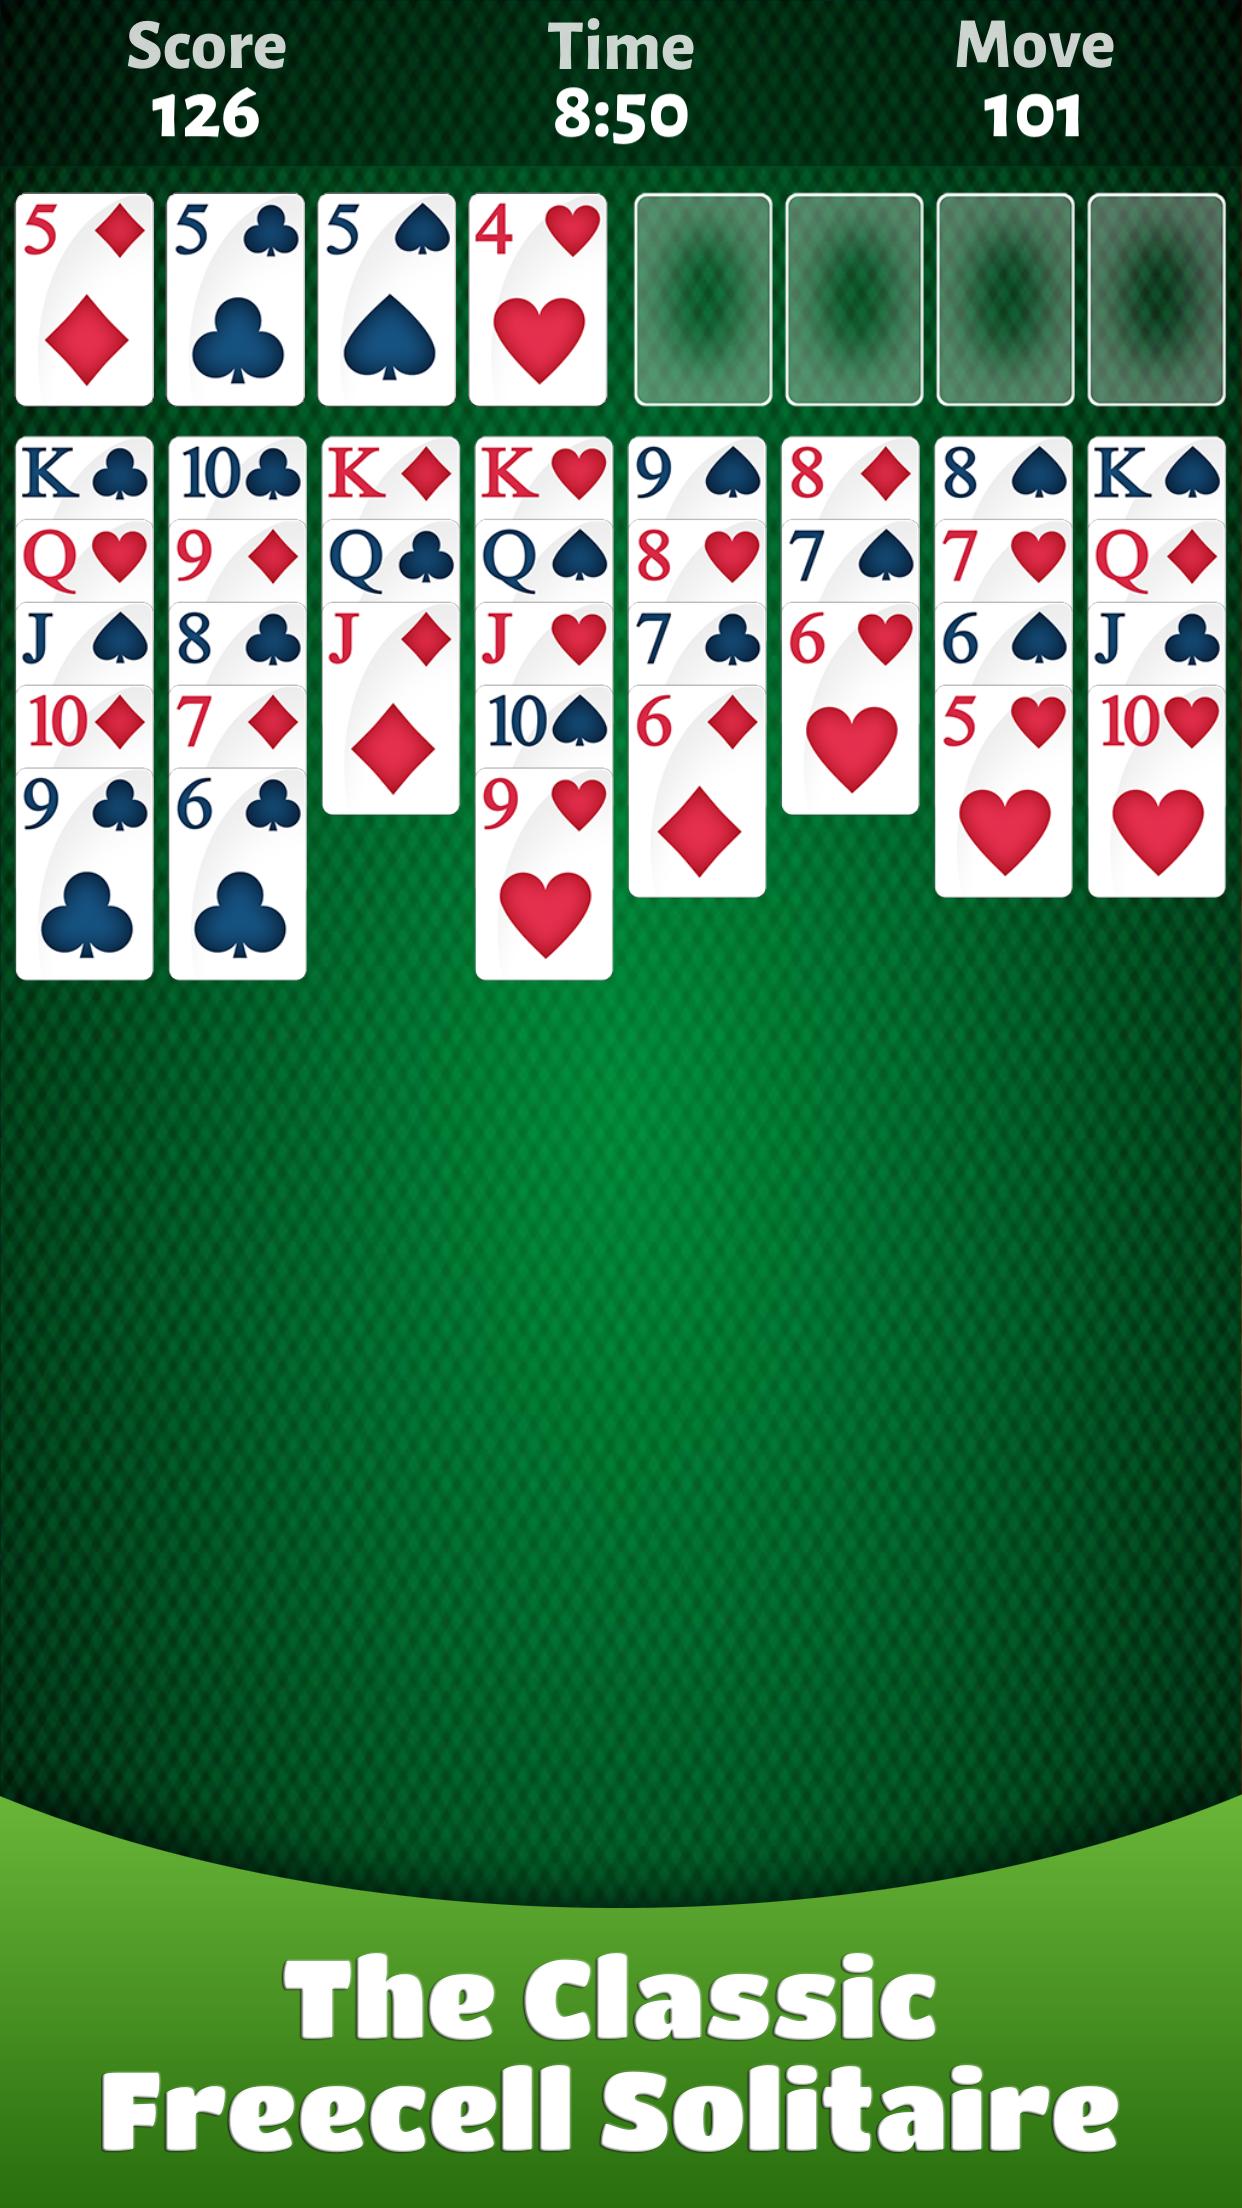 FreeCell Solitario for Android - APK Download